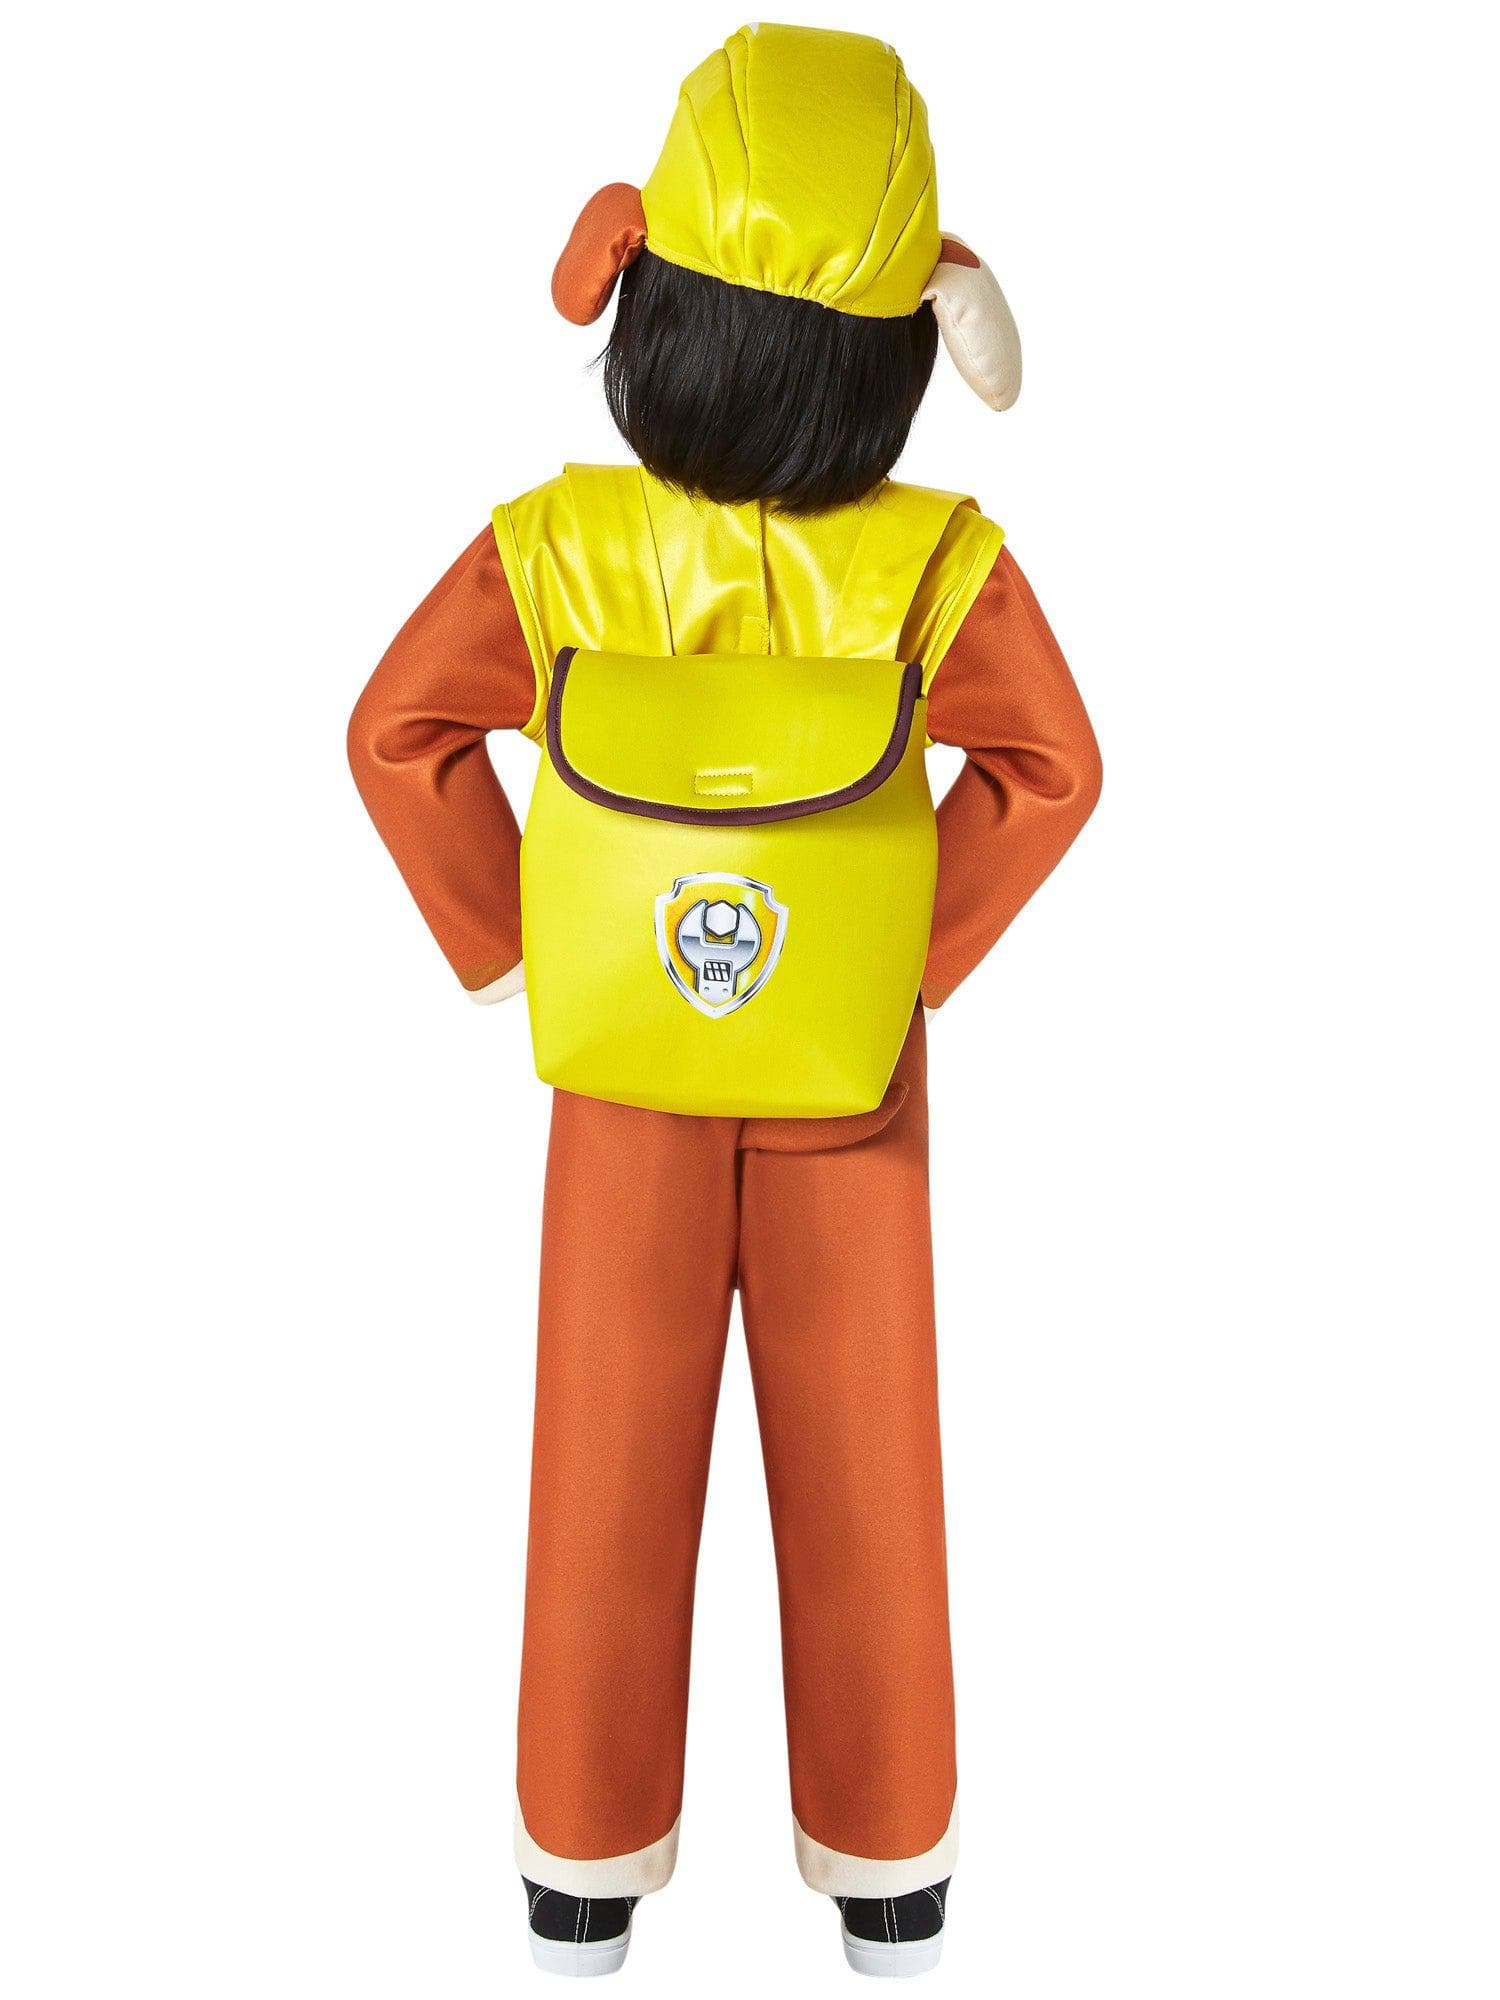 Paw Patrol Rubble Costume for Toddlers - Deluxe - costumes.com